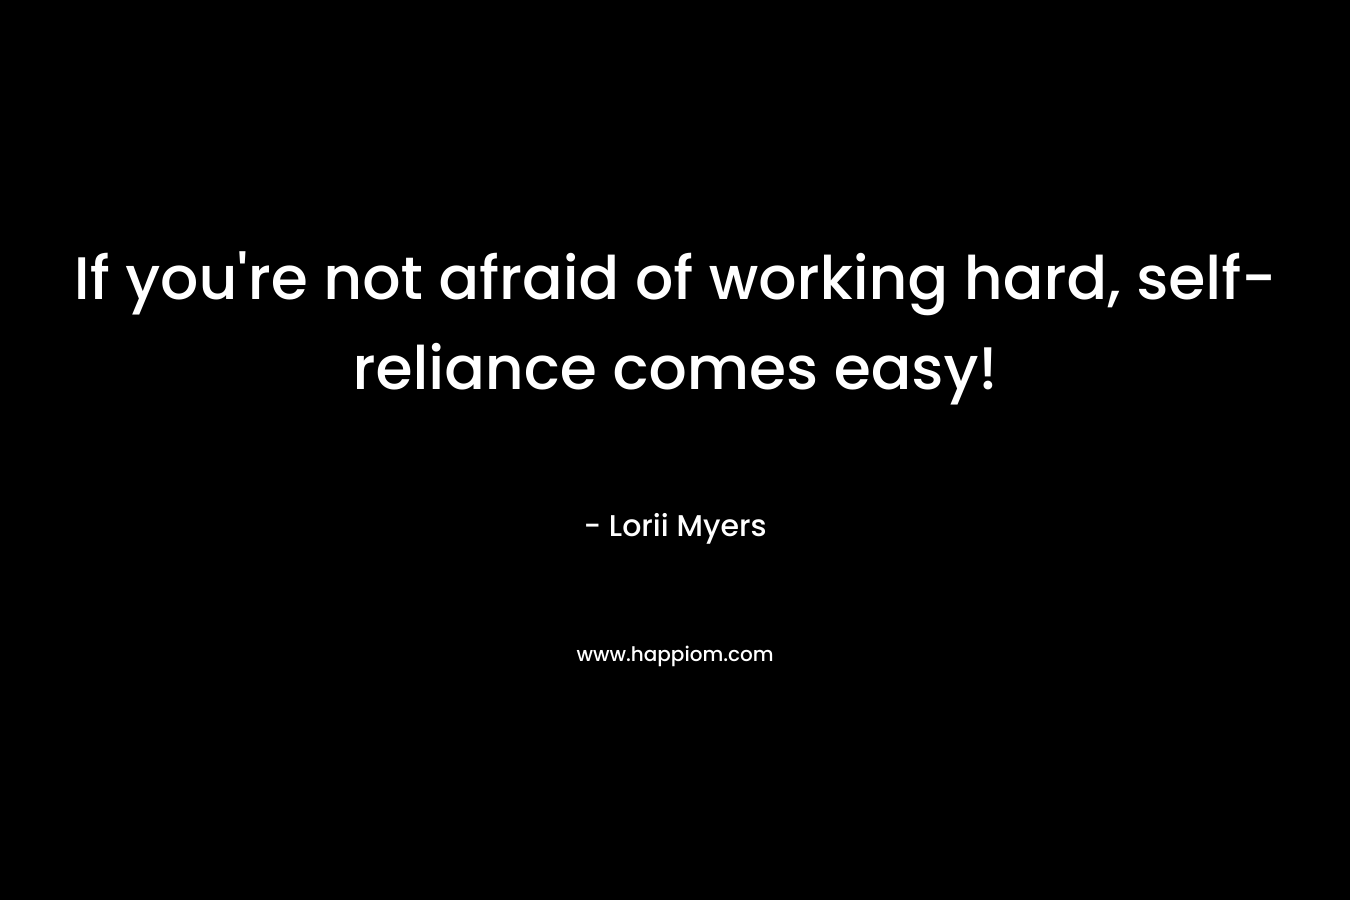 If you're not afraid of working hard, self-reliance comes easy!